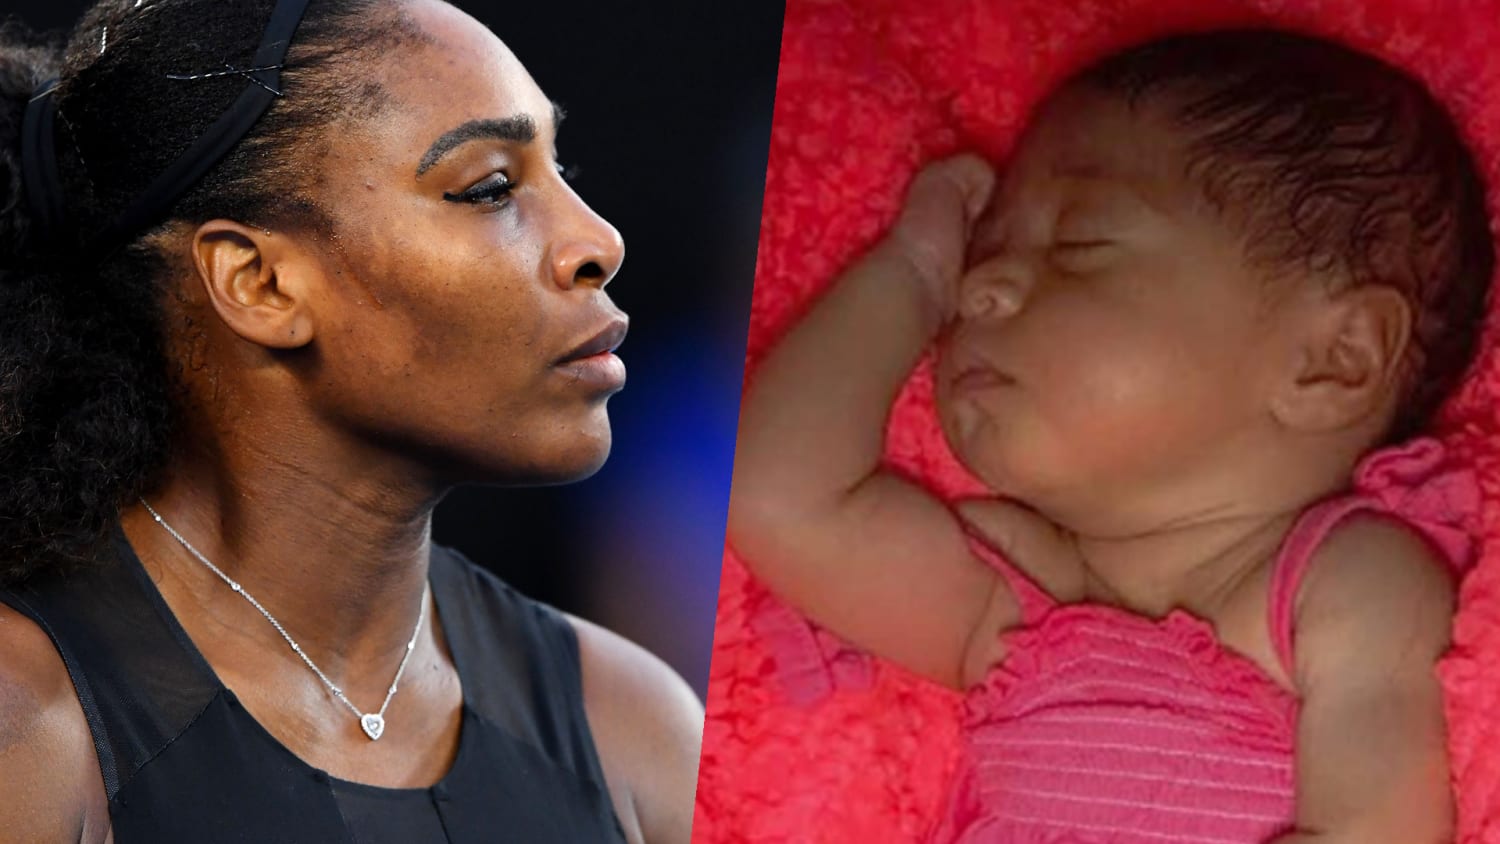 New mom Serena Williams withdraws from Australian Open - TODAY.com1920 x 1080